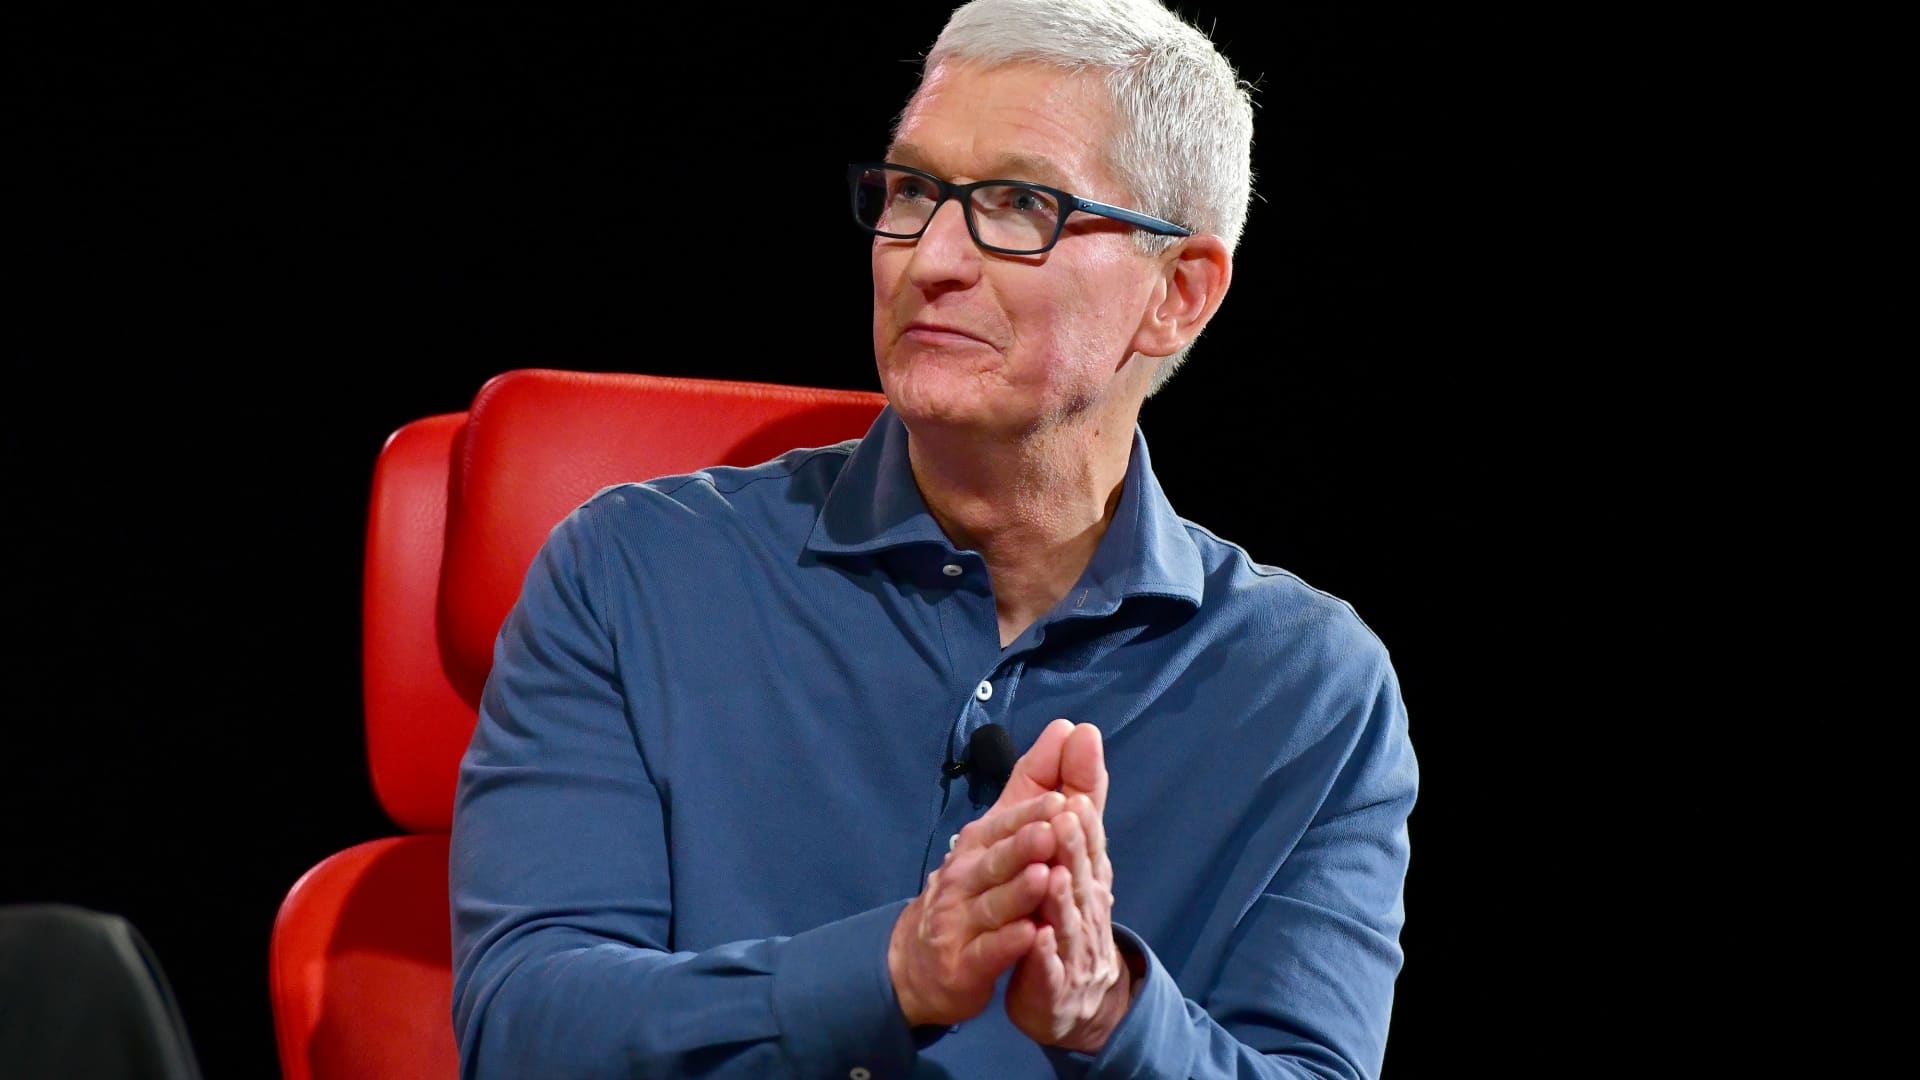 Apple telegraphed that things are getting better after a tough quarter — here's how to interpret its remarks